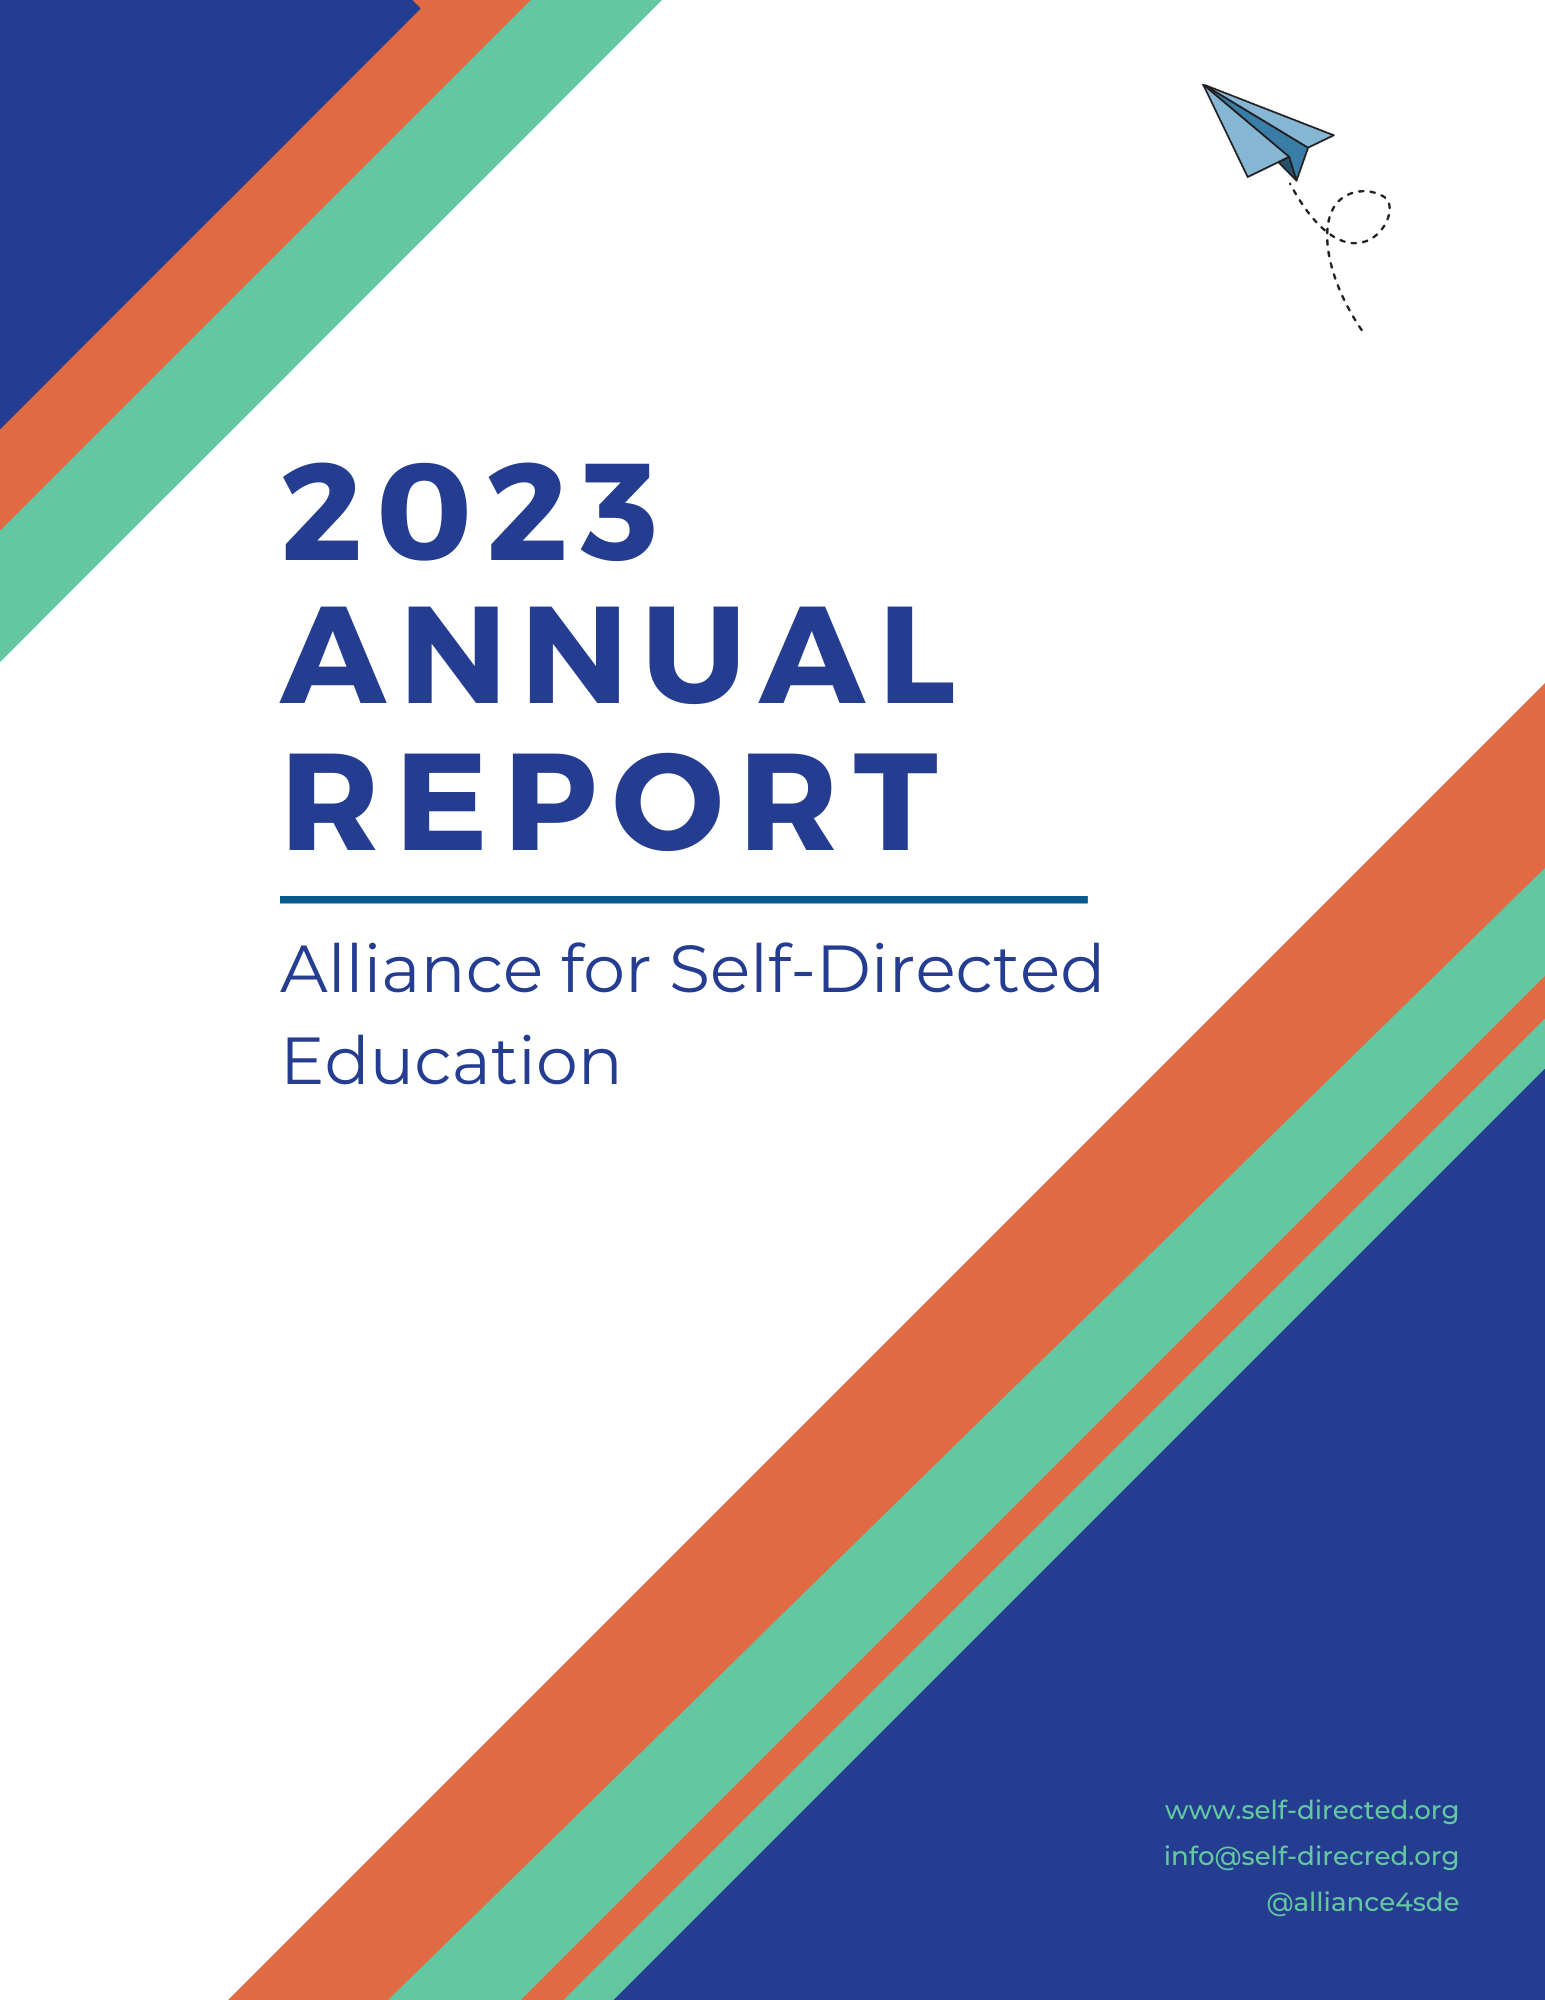 2023 Annual Report for the Alliance for Self-Directed Education